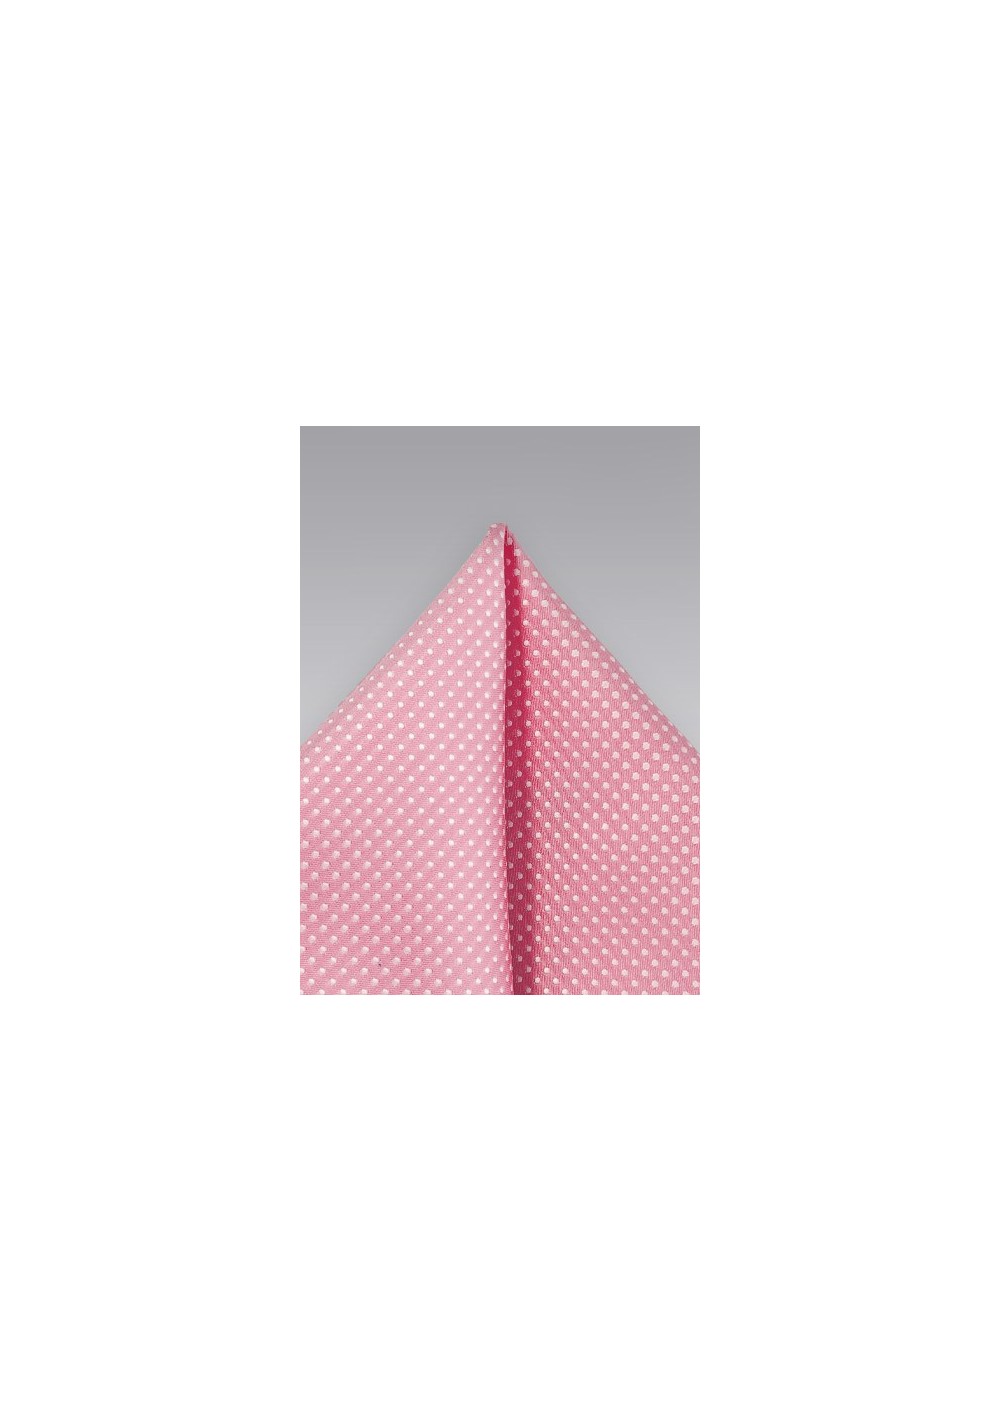 Pin Dotted Pocket Square in Tulip Pink